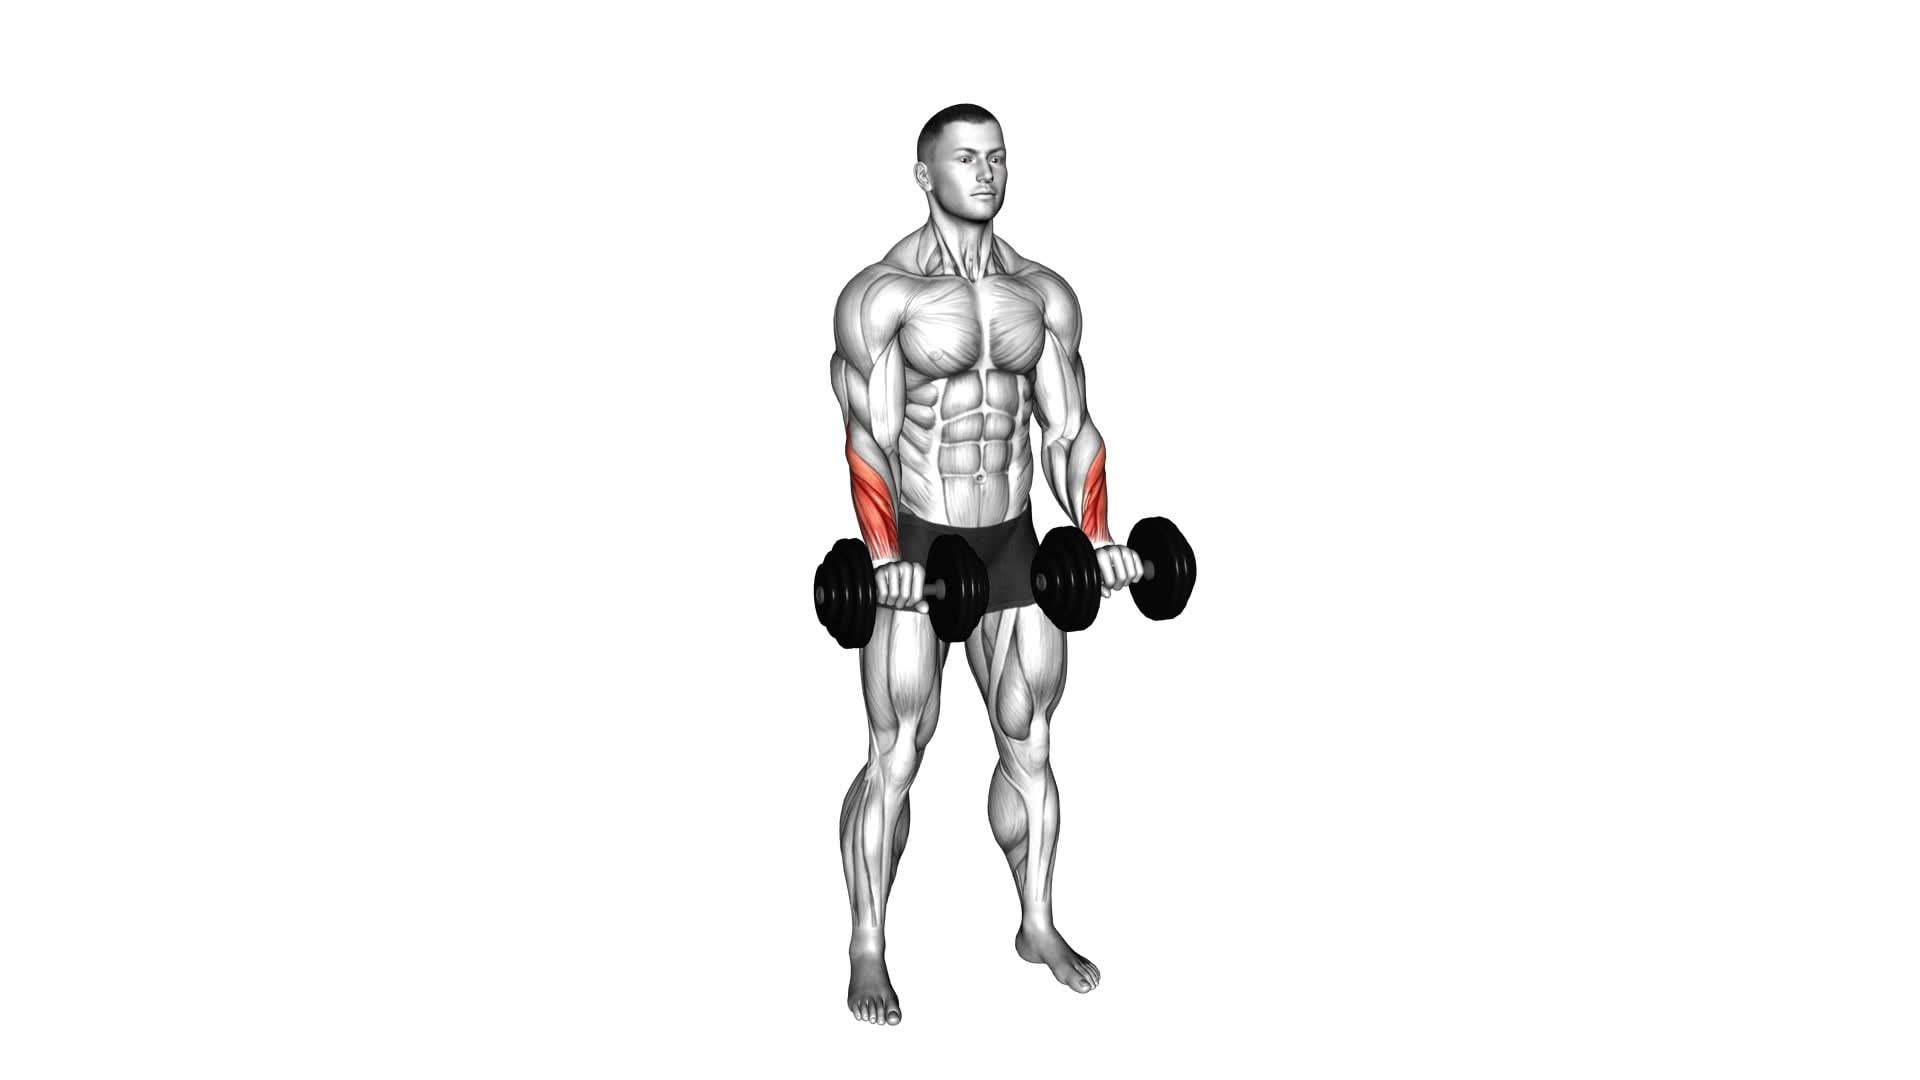 Dumbbell Standing Wrist Reverse Curl - Video Exercise Guide & Tips